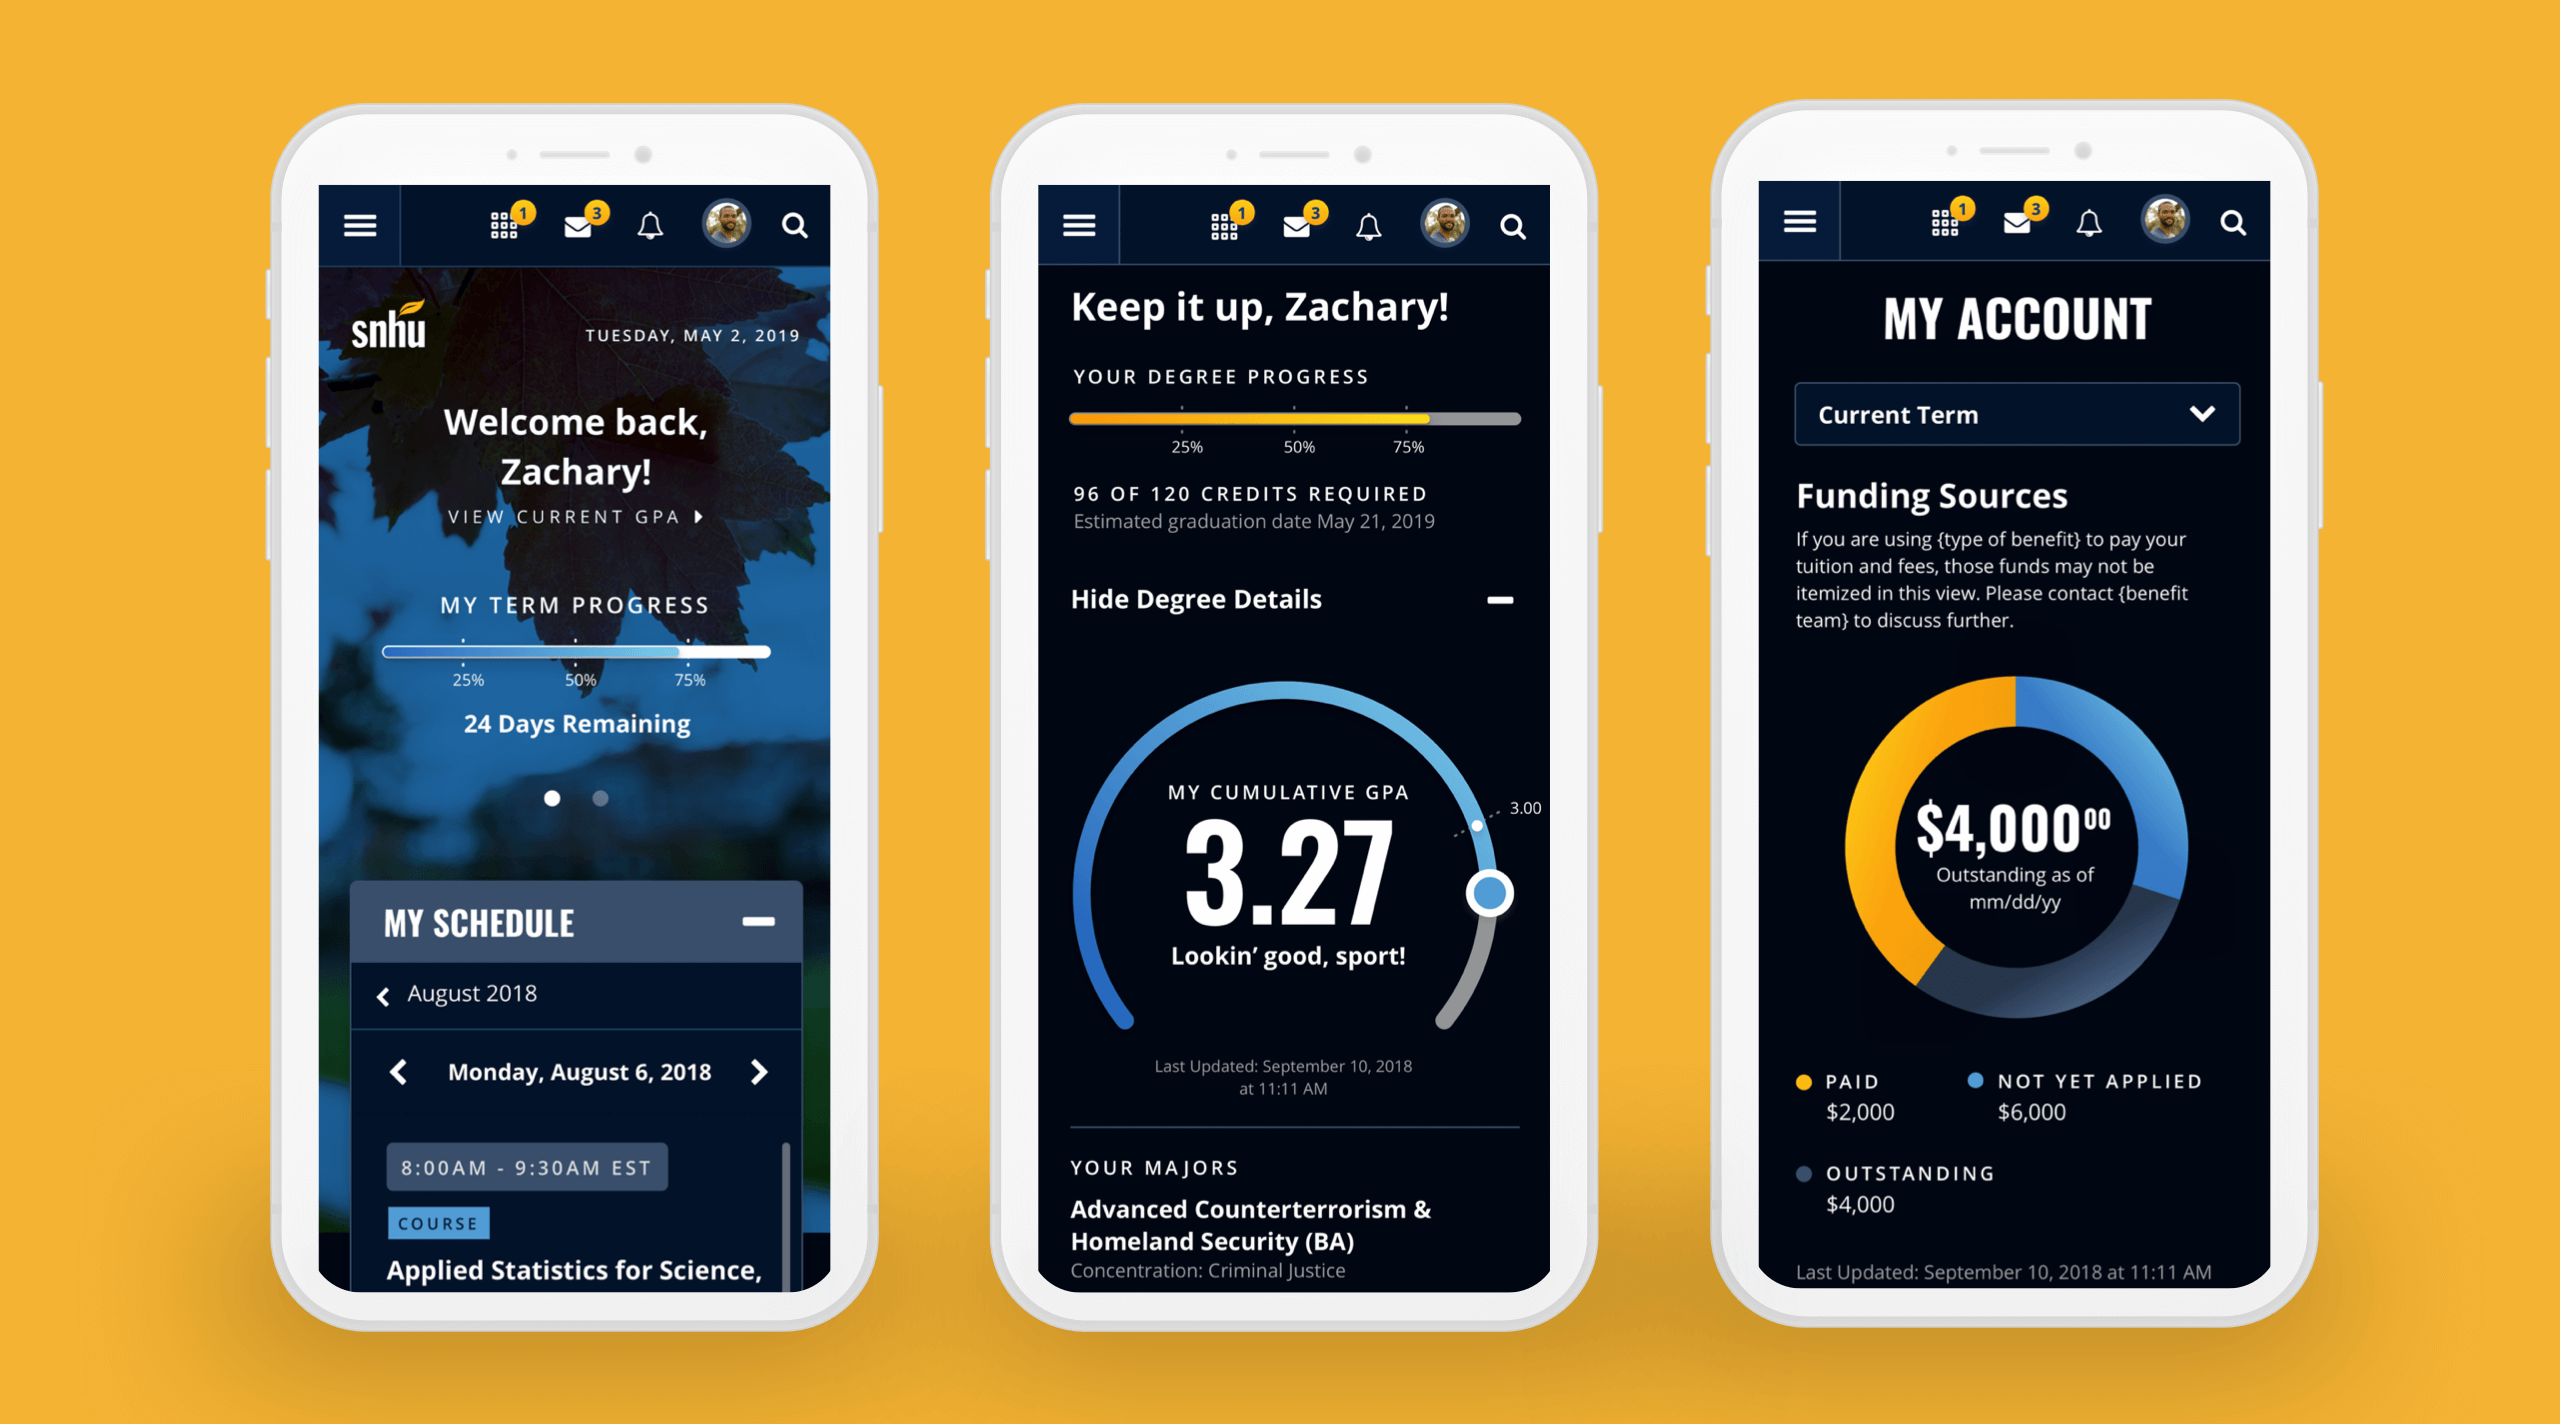 Image of SNHU's new student portal on a smartphone device, in dark mode